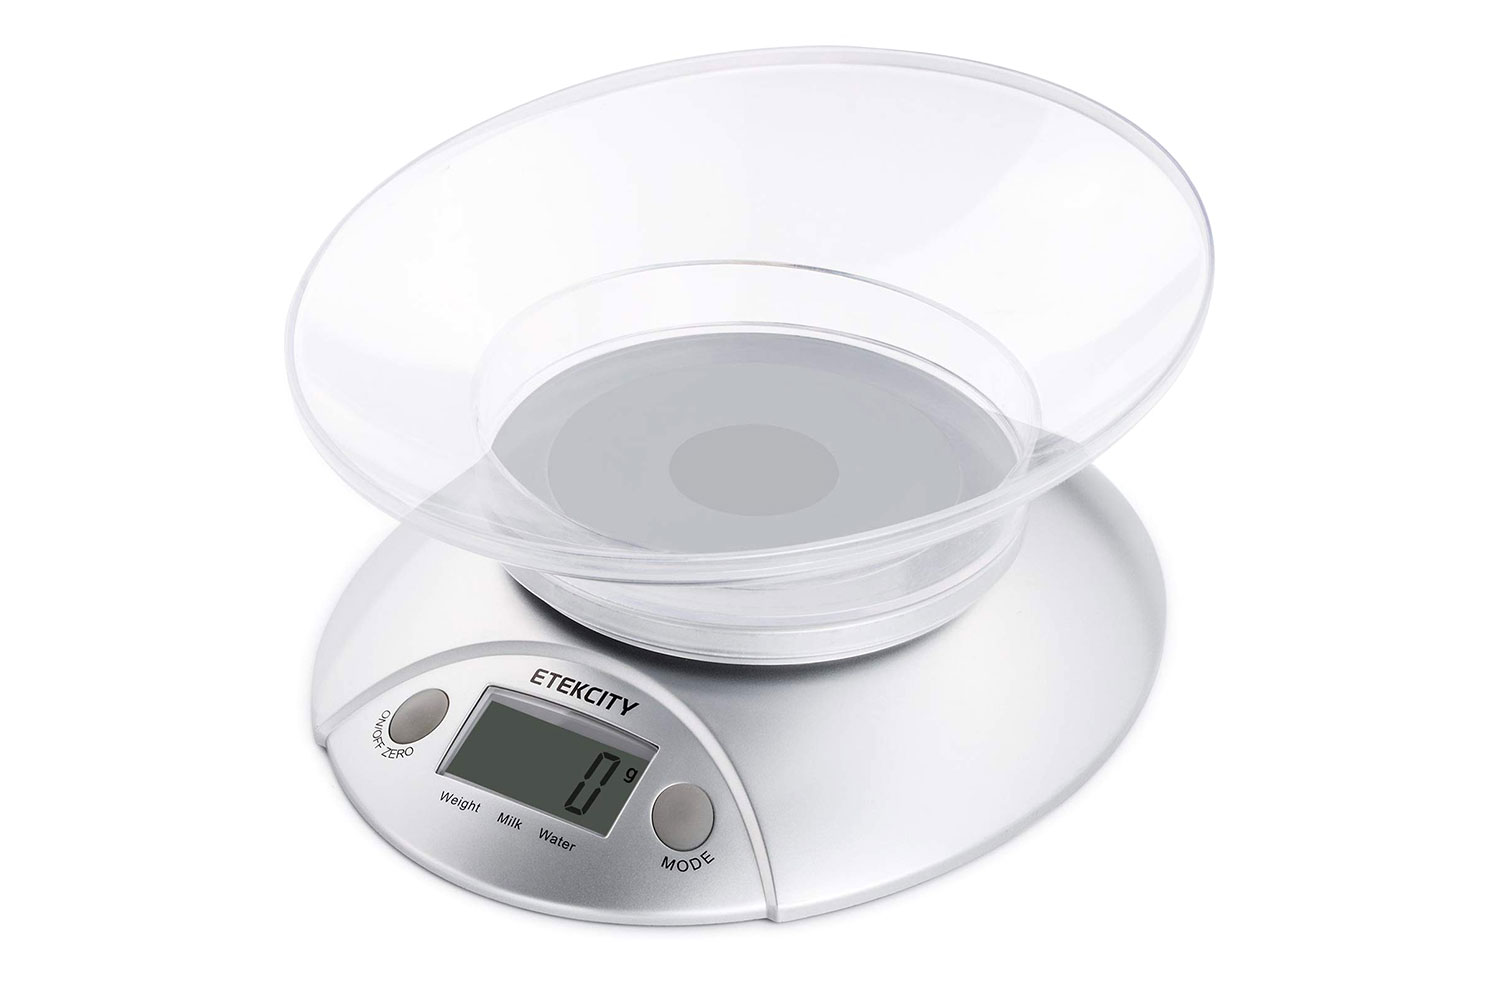 https://www.themanual.com/wp-content/uploads/sites/9/2018/12/etekcity-digital-food-scale-with-removable-bowl.jpg?fit=1500%2C1000&p=1